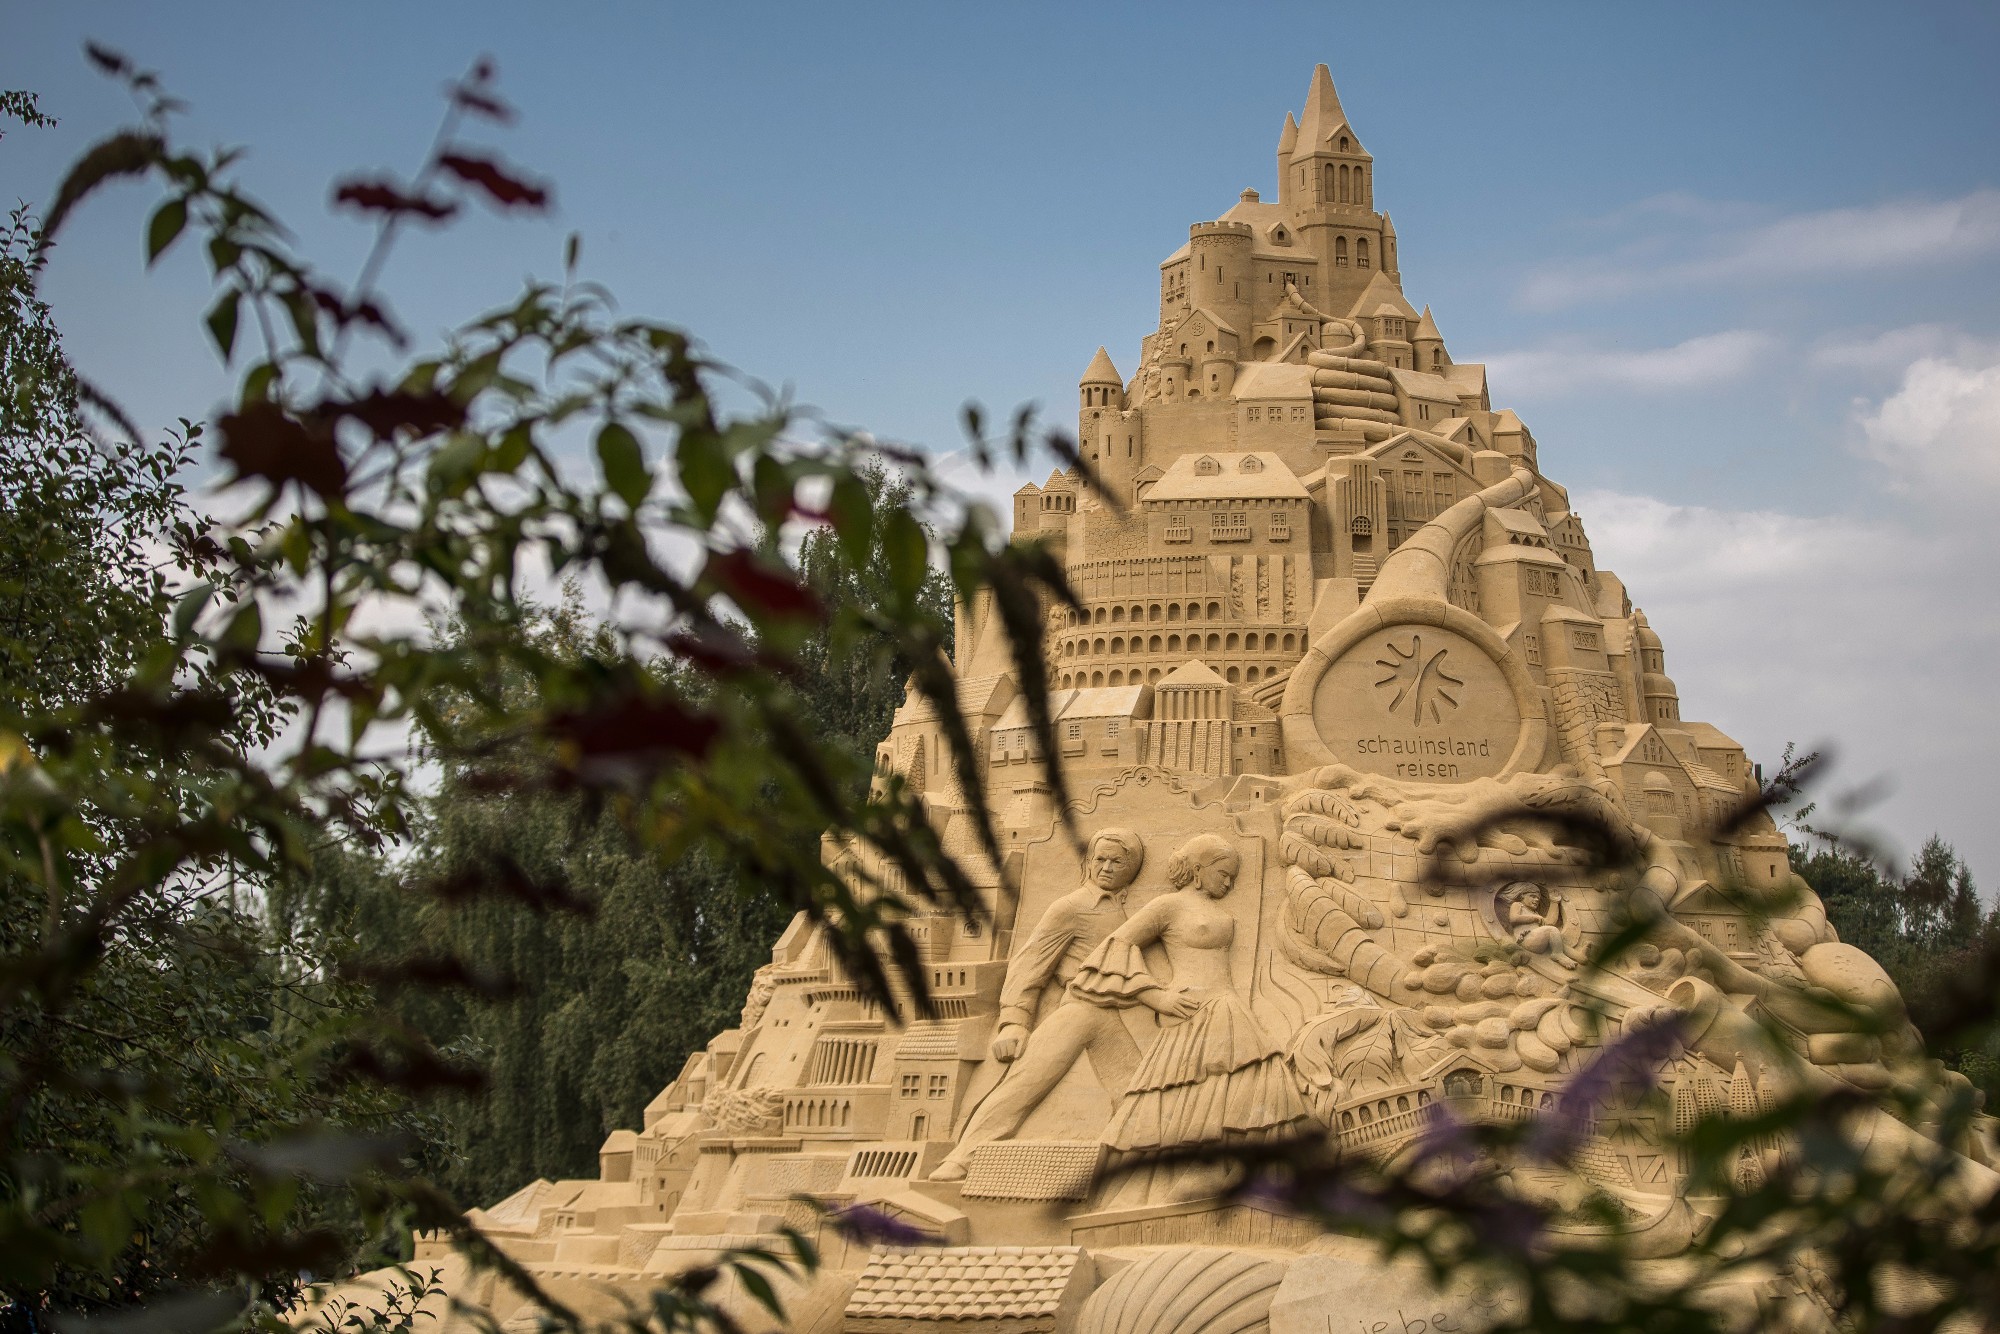 The world's largest sandcastle has just been built in Germany